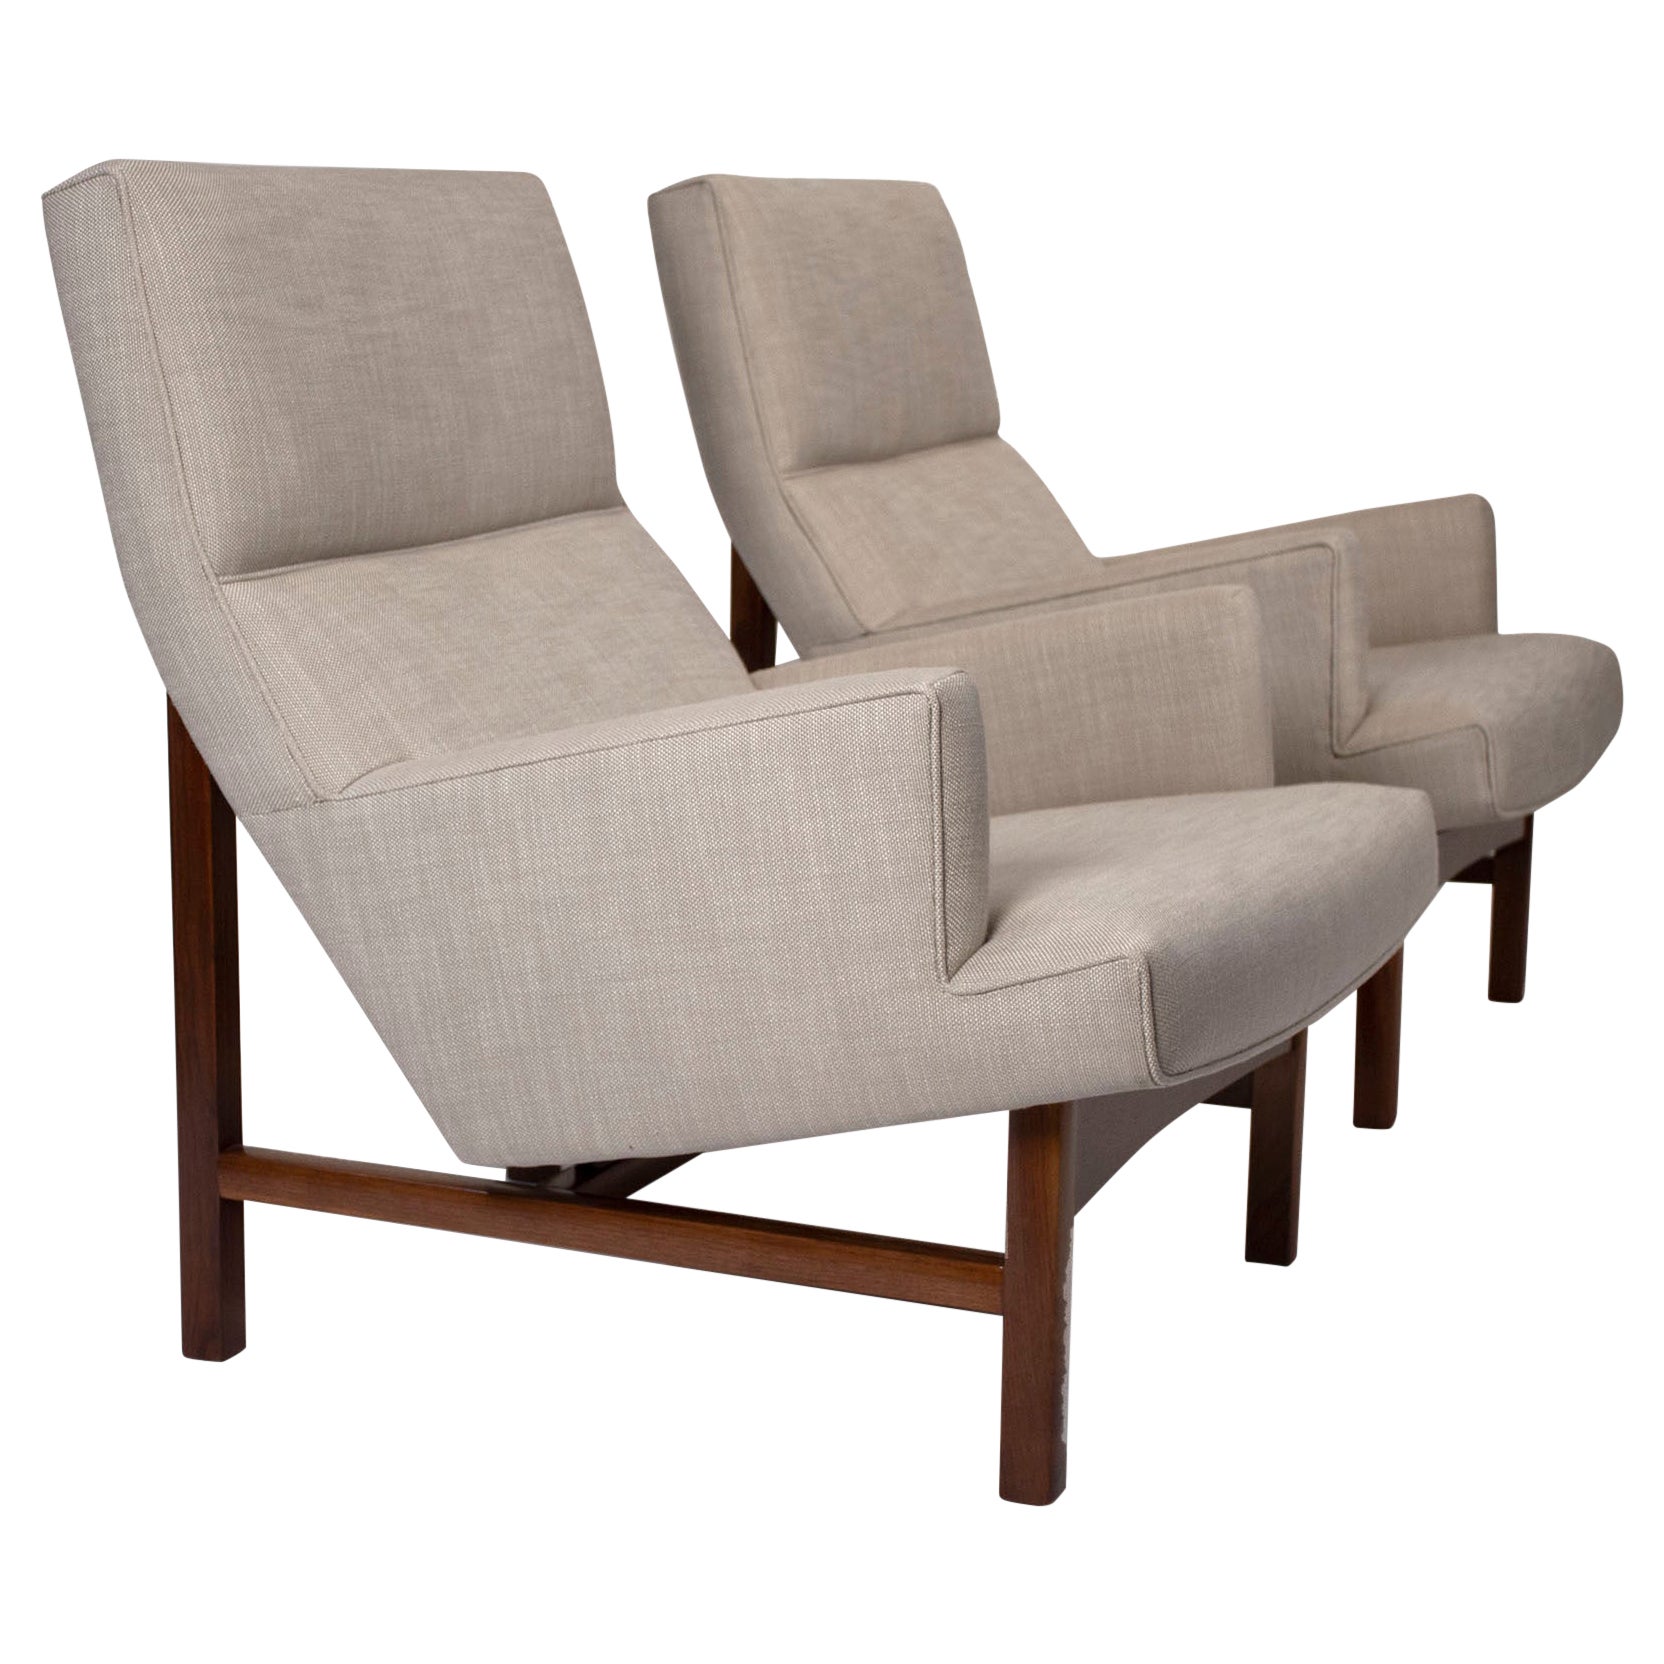 Jen Risom Floating Lounge Chairs in Walnut Cradle Frames with Linen Upholstery